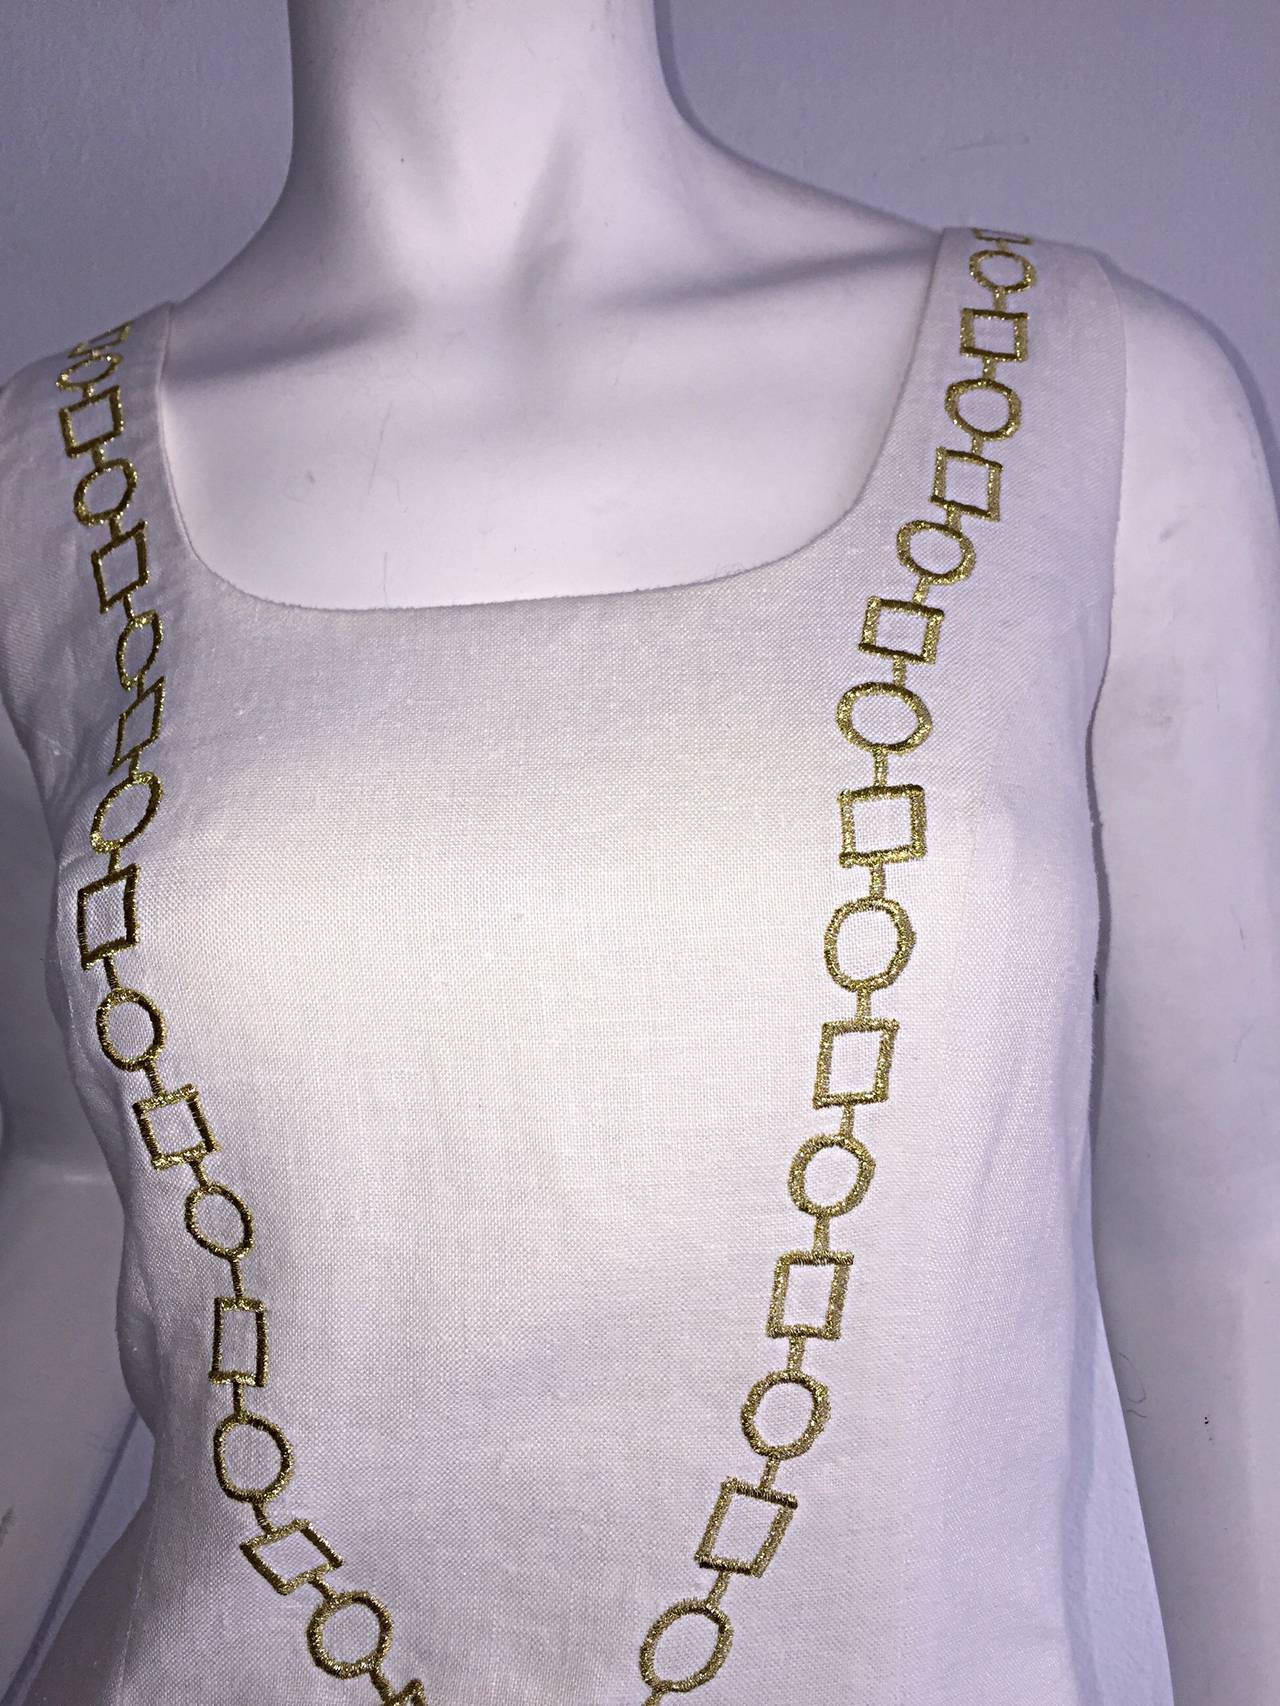 Amazing Vintage Nautical Anchor Novelty Chain Necklace Print Linen Dress In Excellent Condition For Sale In San Diego, CA